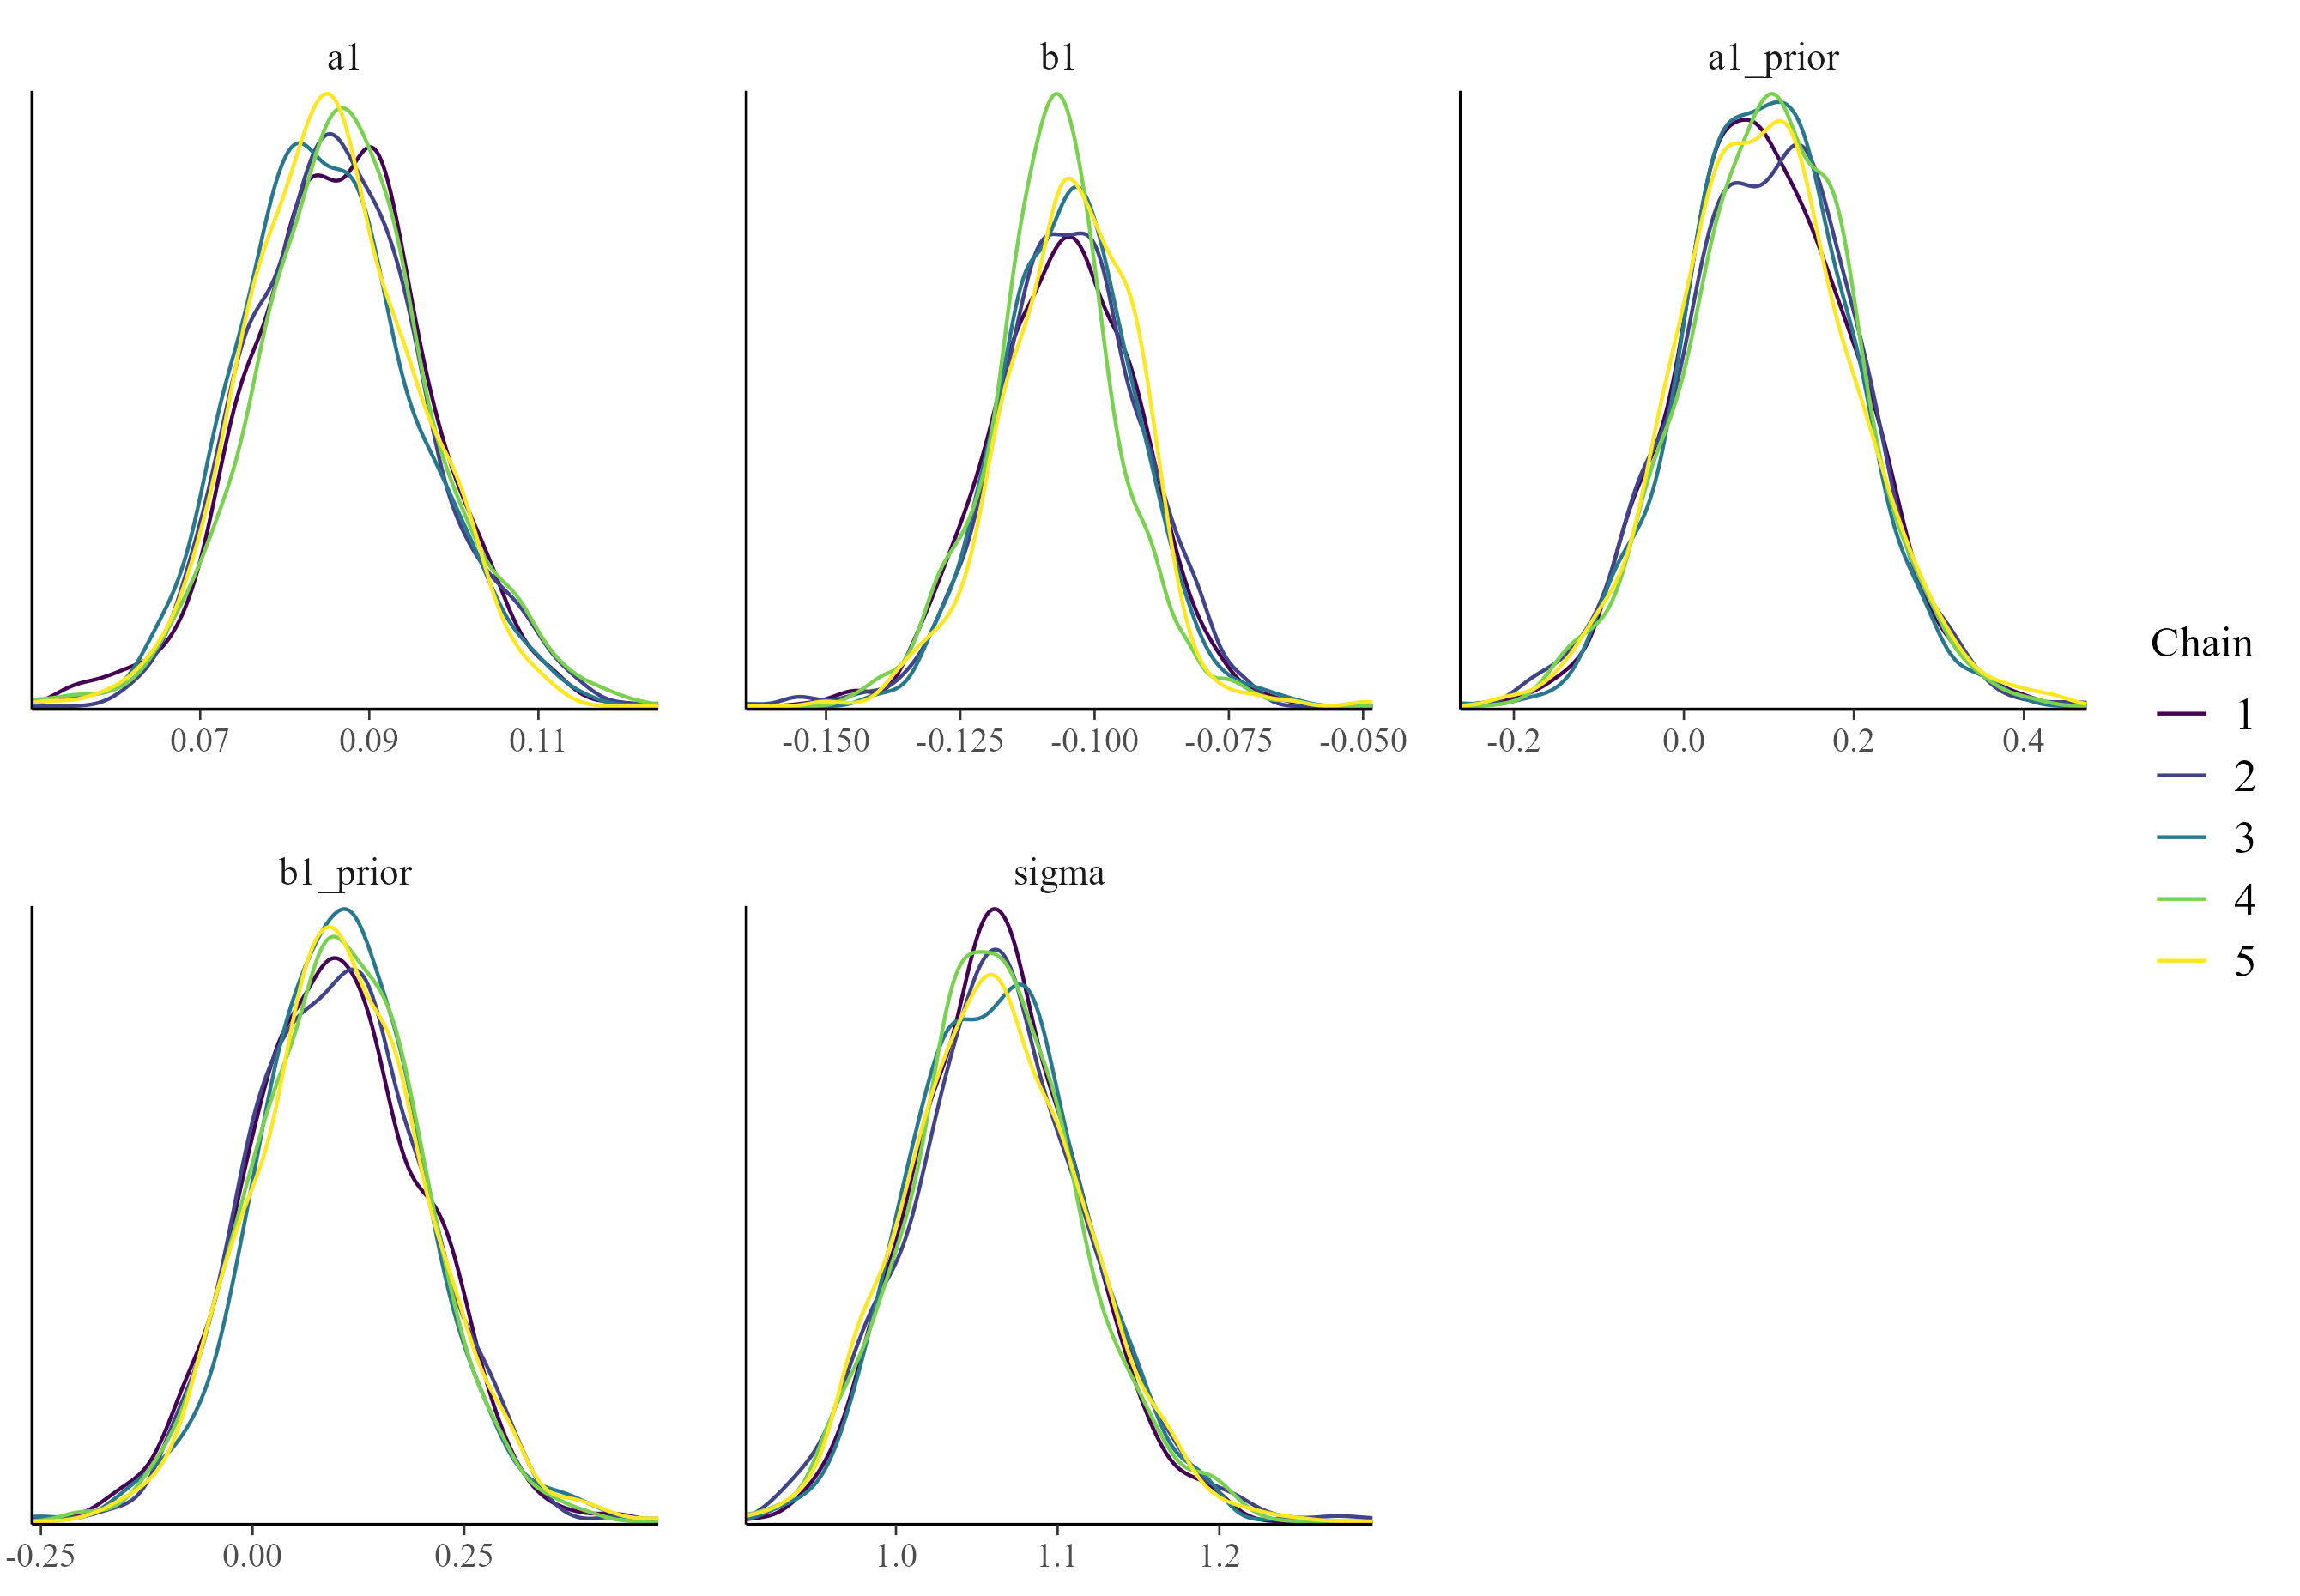 Density plot of priors and posteriors for several model parameters.